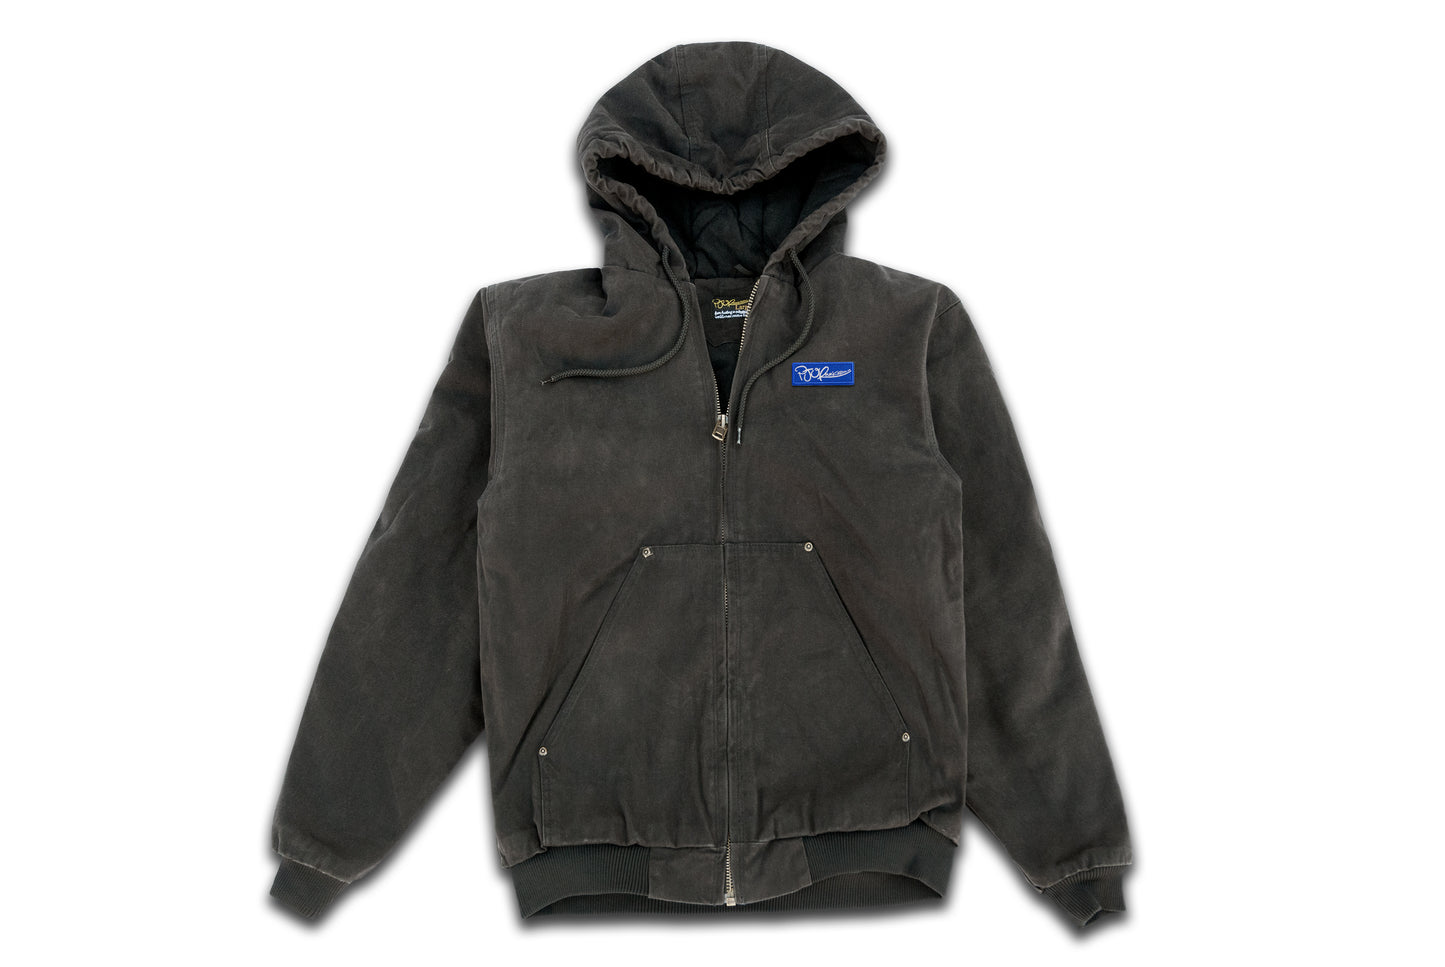 Bronx Bombers Patch on Highland Hooded Jacket